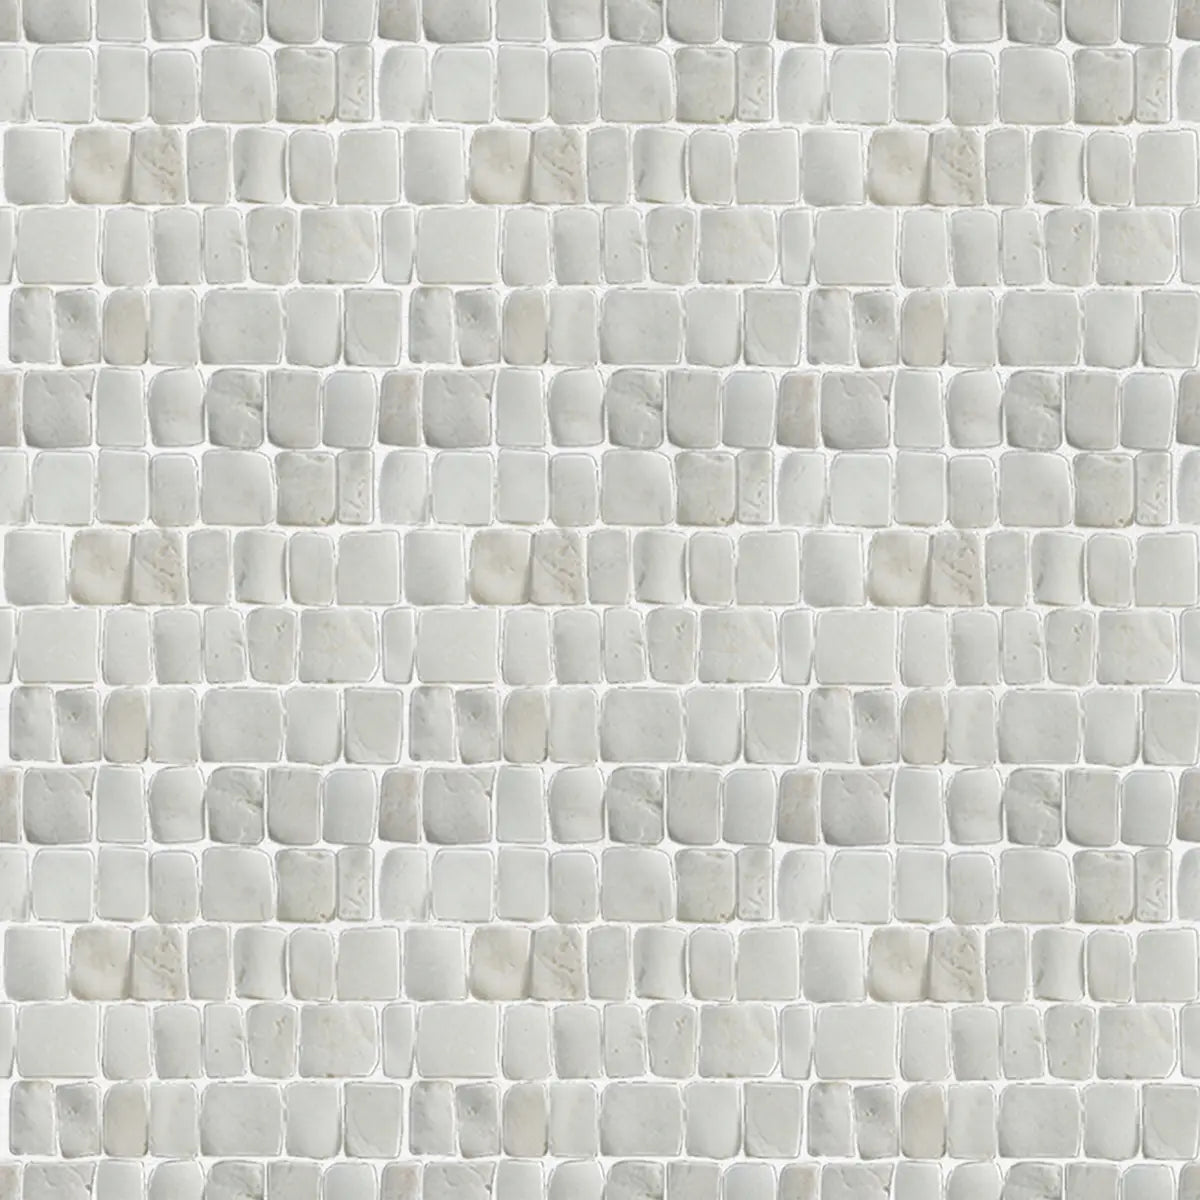 Natural White Stone Mosaic Tile for Wall, Canine White Mosaic Tile